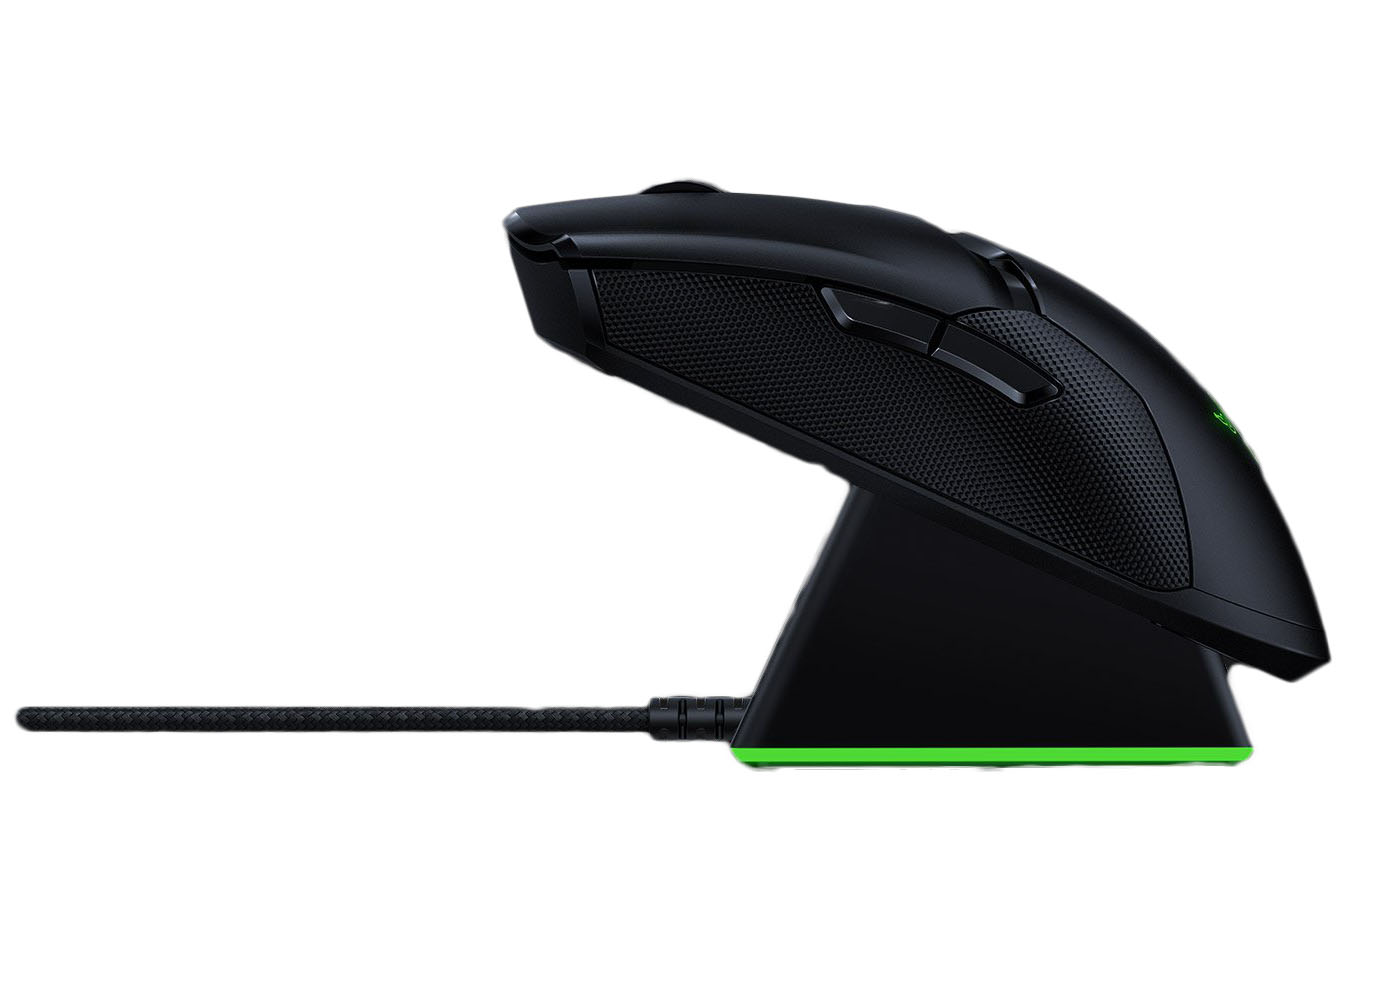 Razer Viper Ultimate Wireless Gaming Mouse with Charging Dock RZ01